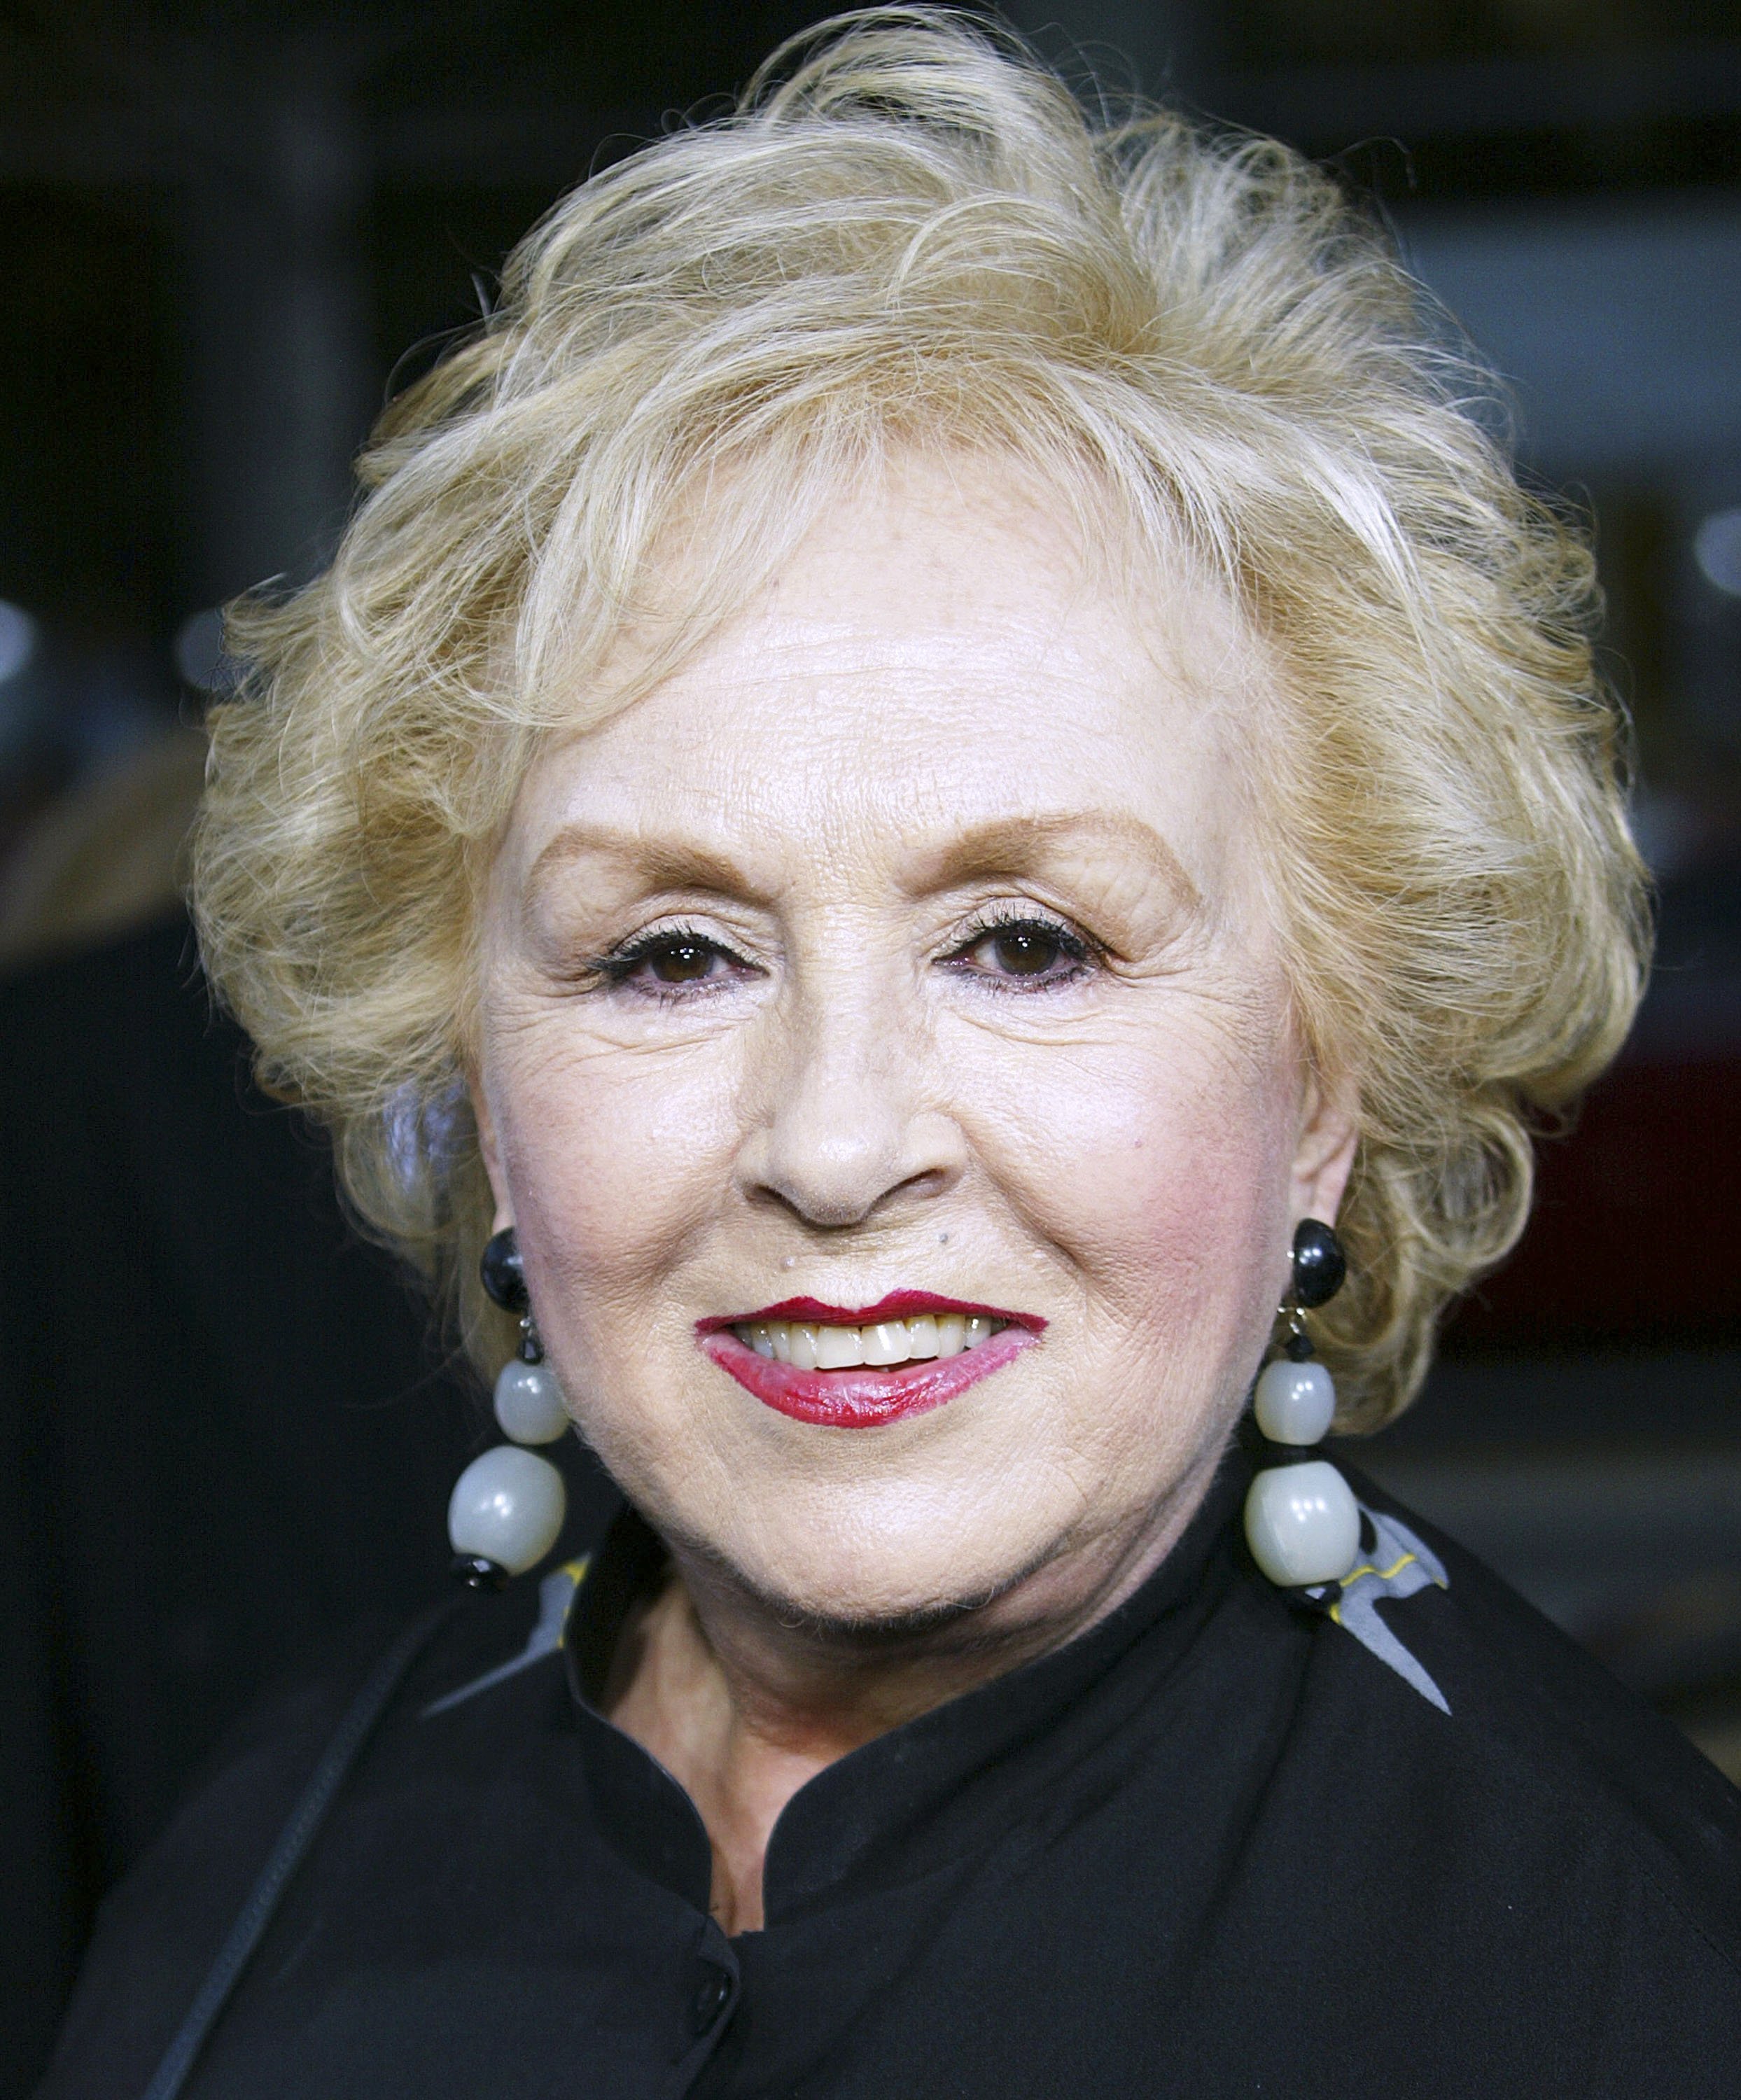 Doris Roberts at the film premiere of “The Longest Yard” on May 19, 2005 in California | Photo: Getty Images